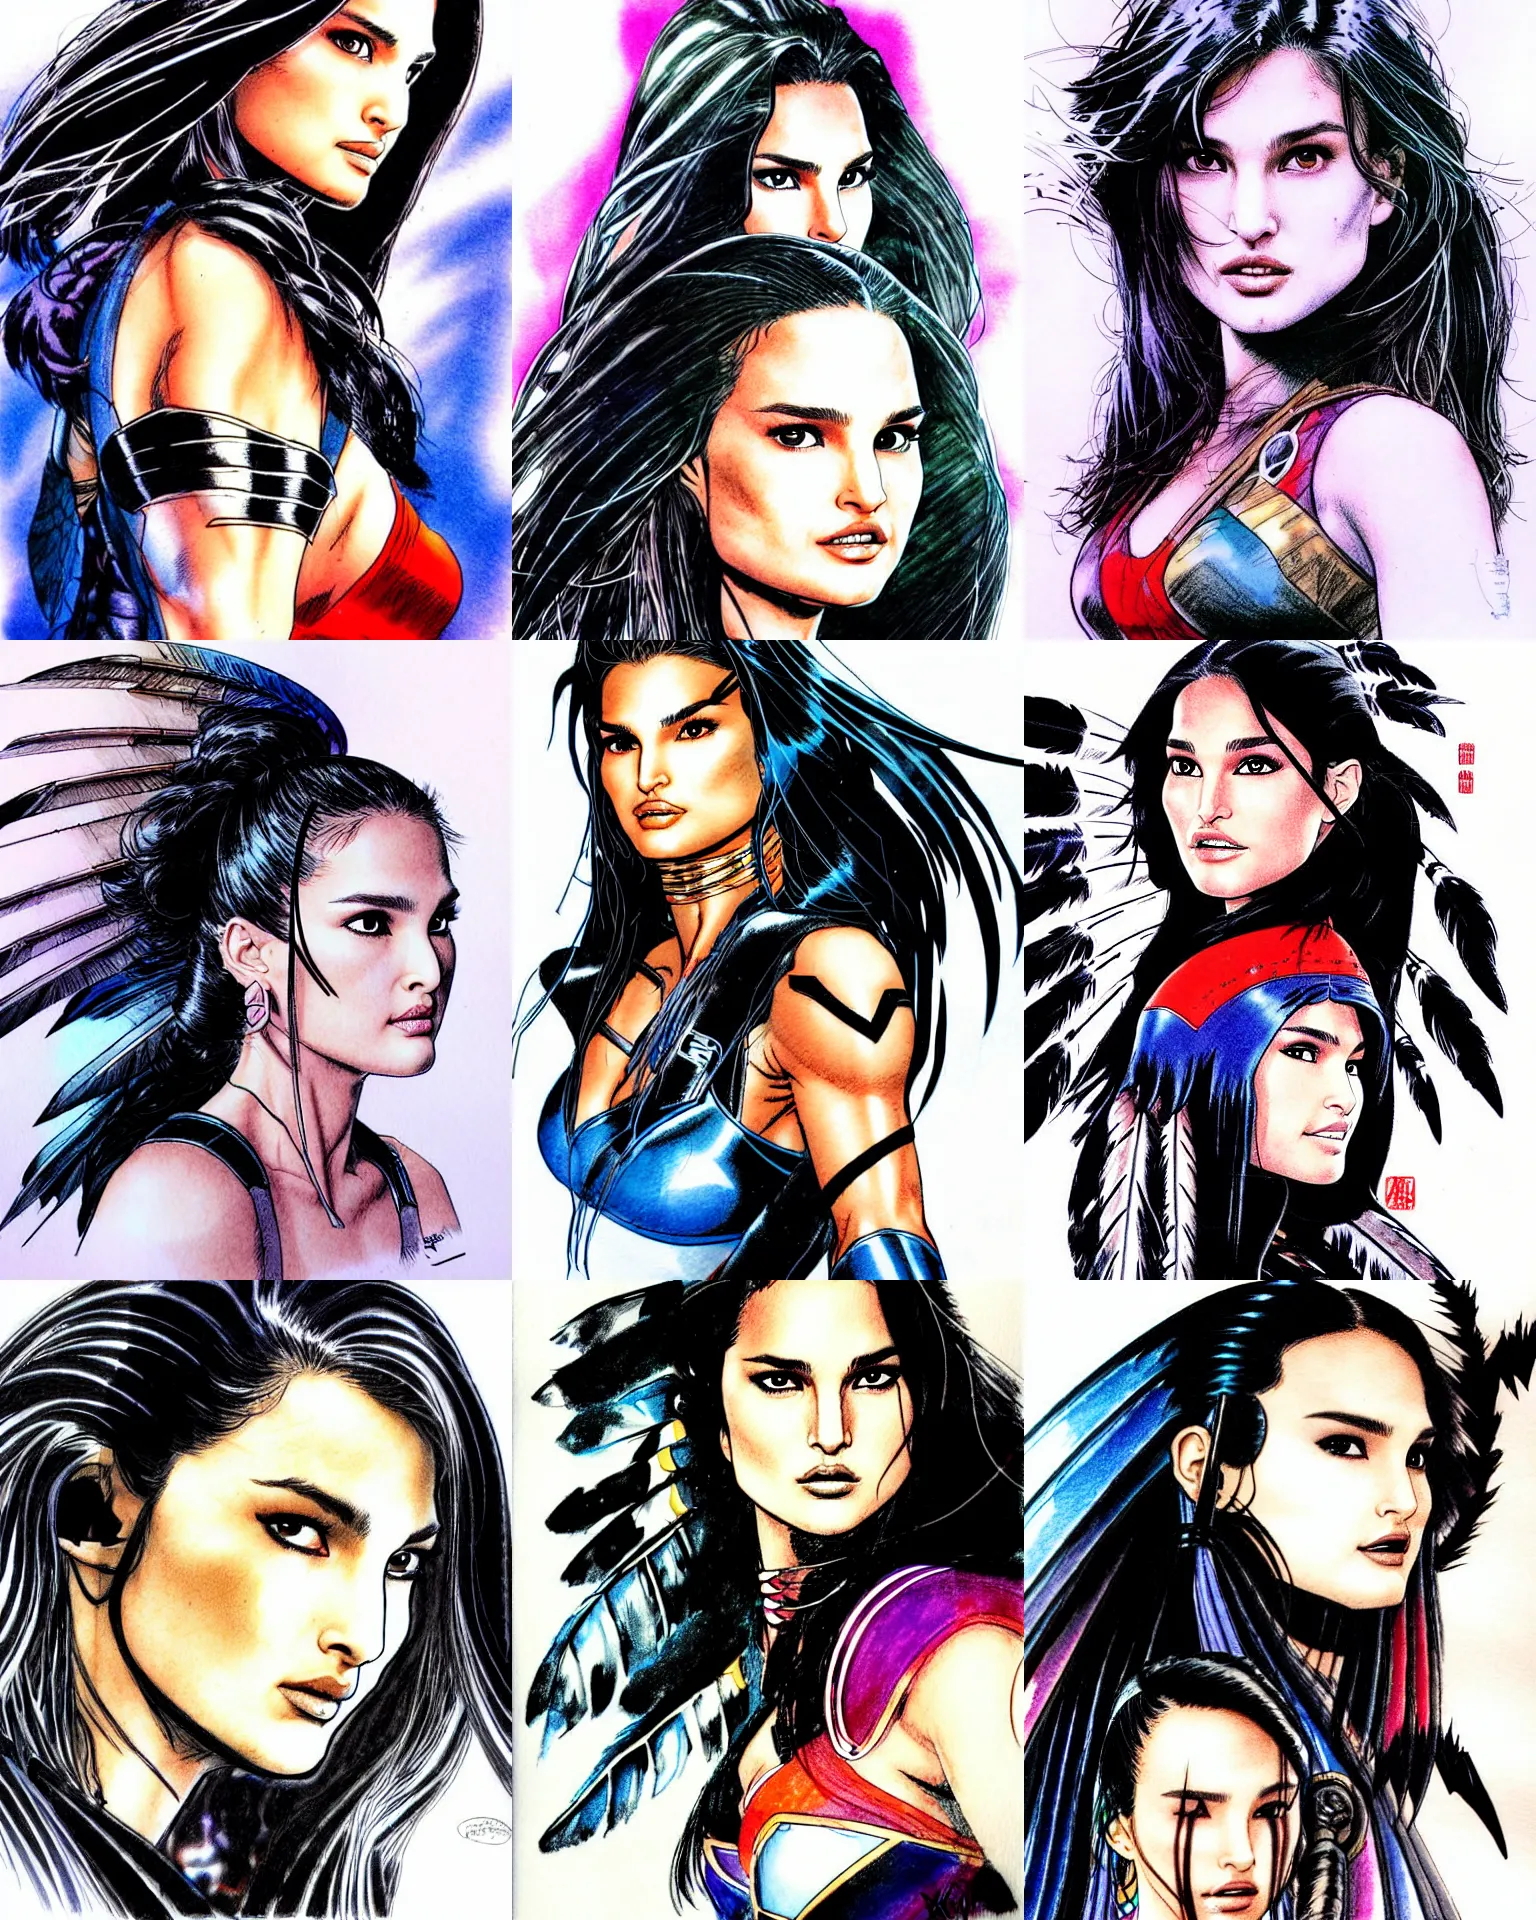 Prompt: jim lee!!! ink colorised airbrushed gouache sketch by jim lee close up macro centered sideview headshot of native indian chinese natalie portman cindy crawford with black long hair in the style of jim lee, x - men superhero comic book character by jim lee